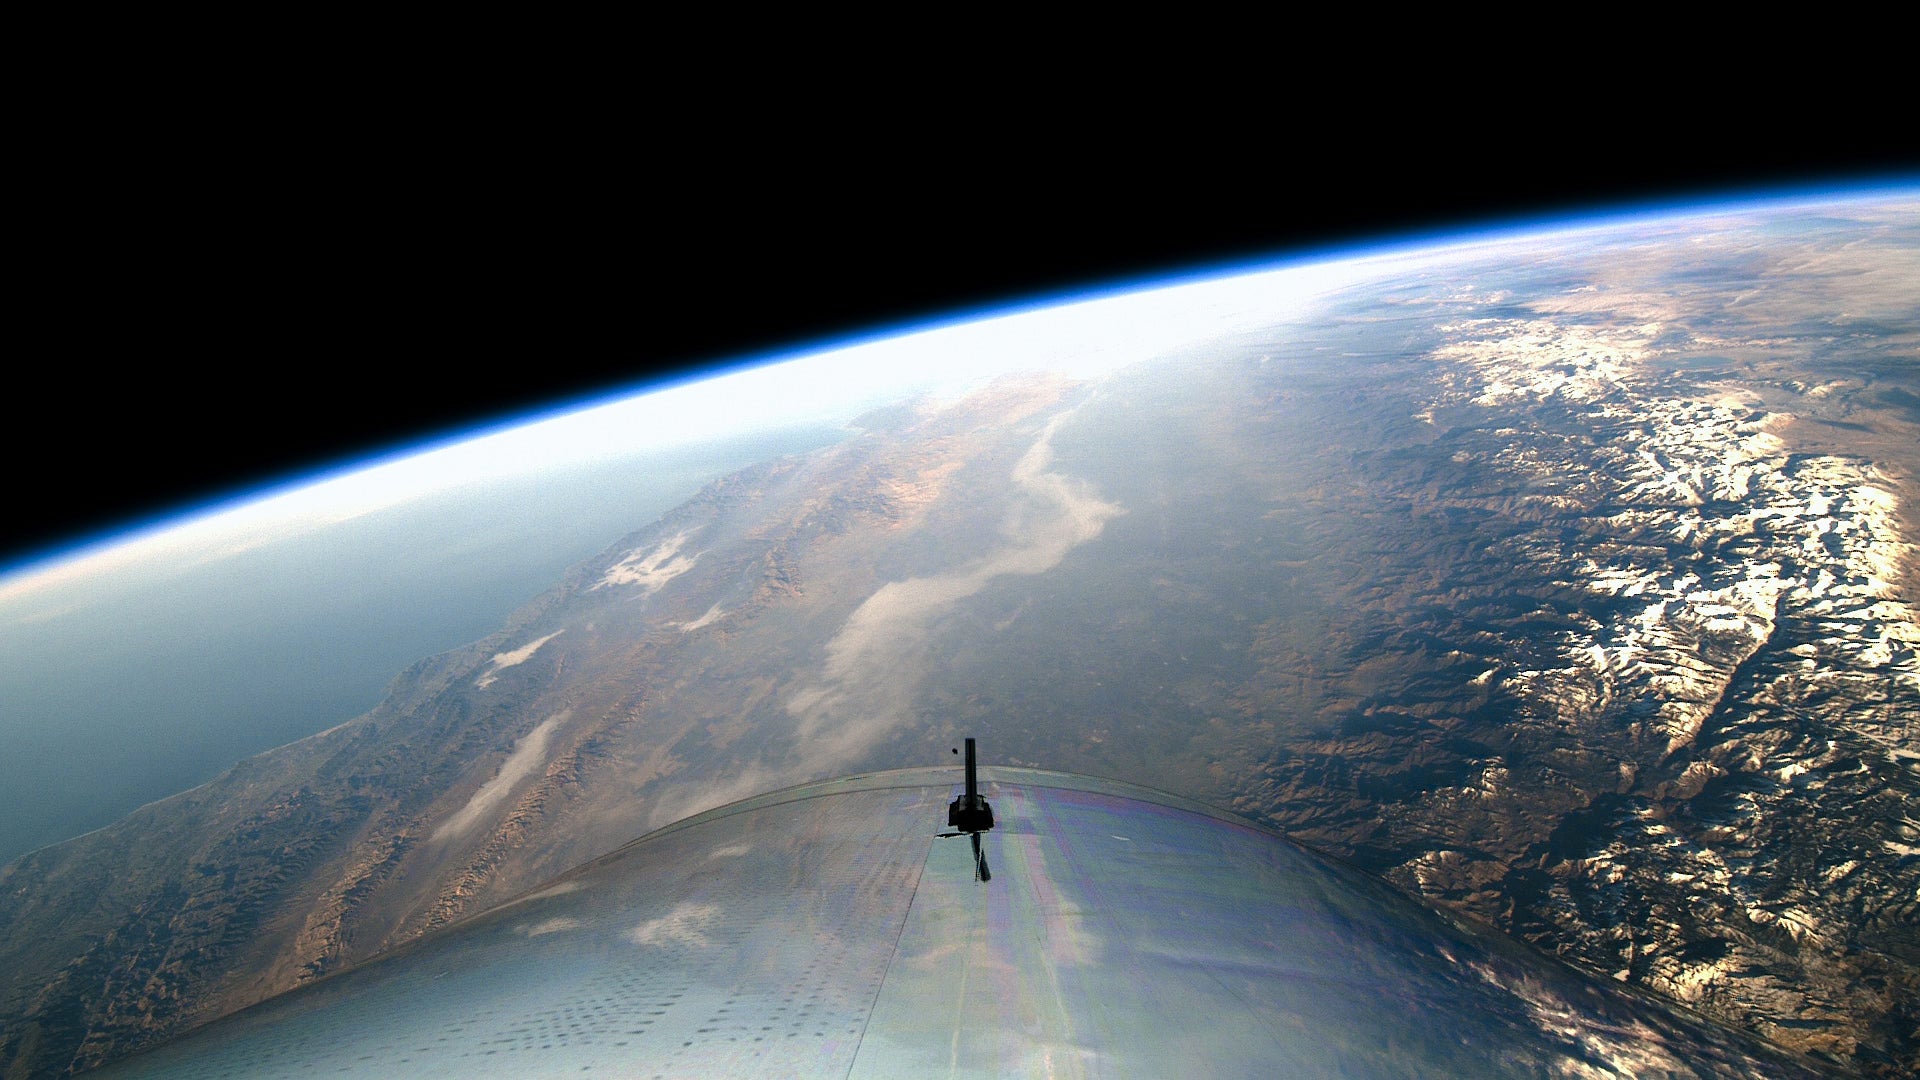 View from space on Virgin Galactic’s first spaceflight